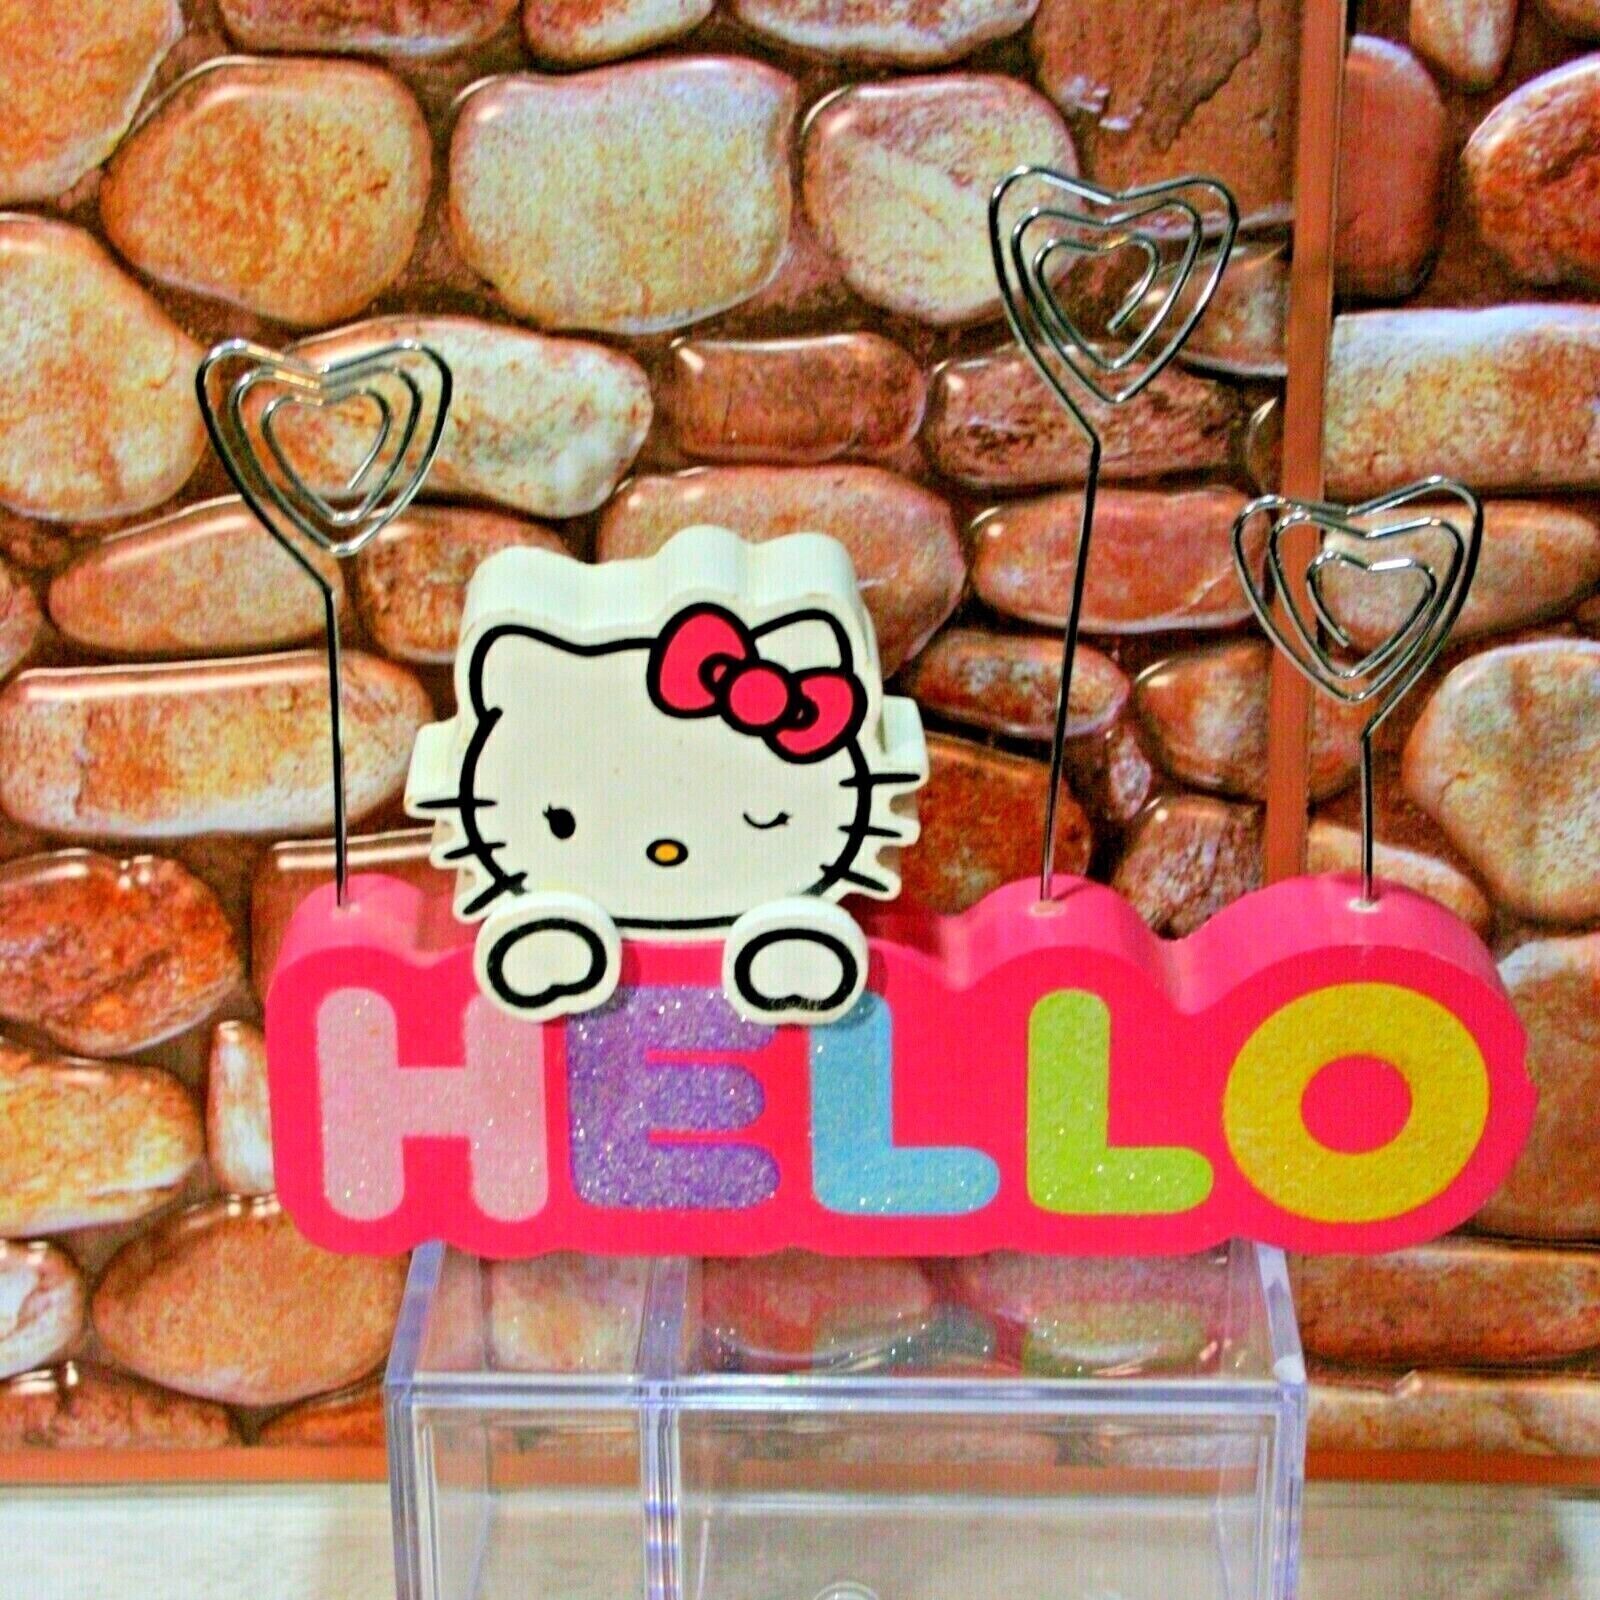 Sanrio Pink Hello Kitty 2012 Wood & Metal Picture Holder Card Holder Home Decor